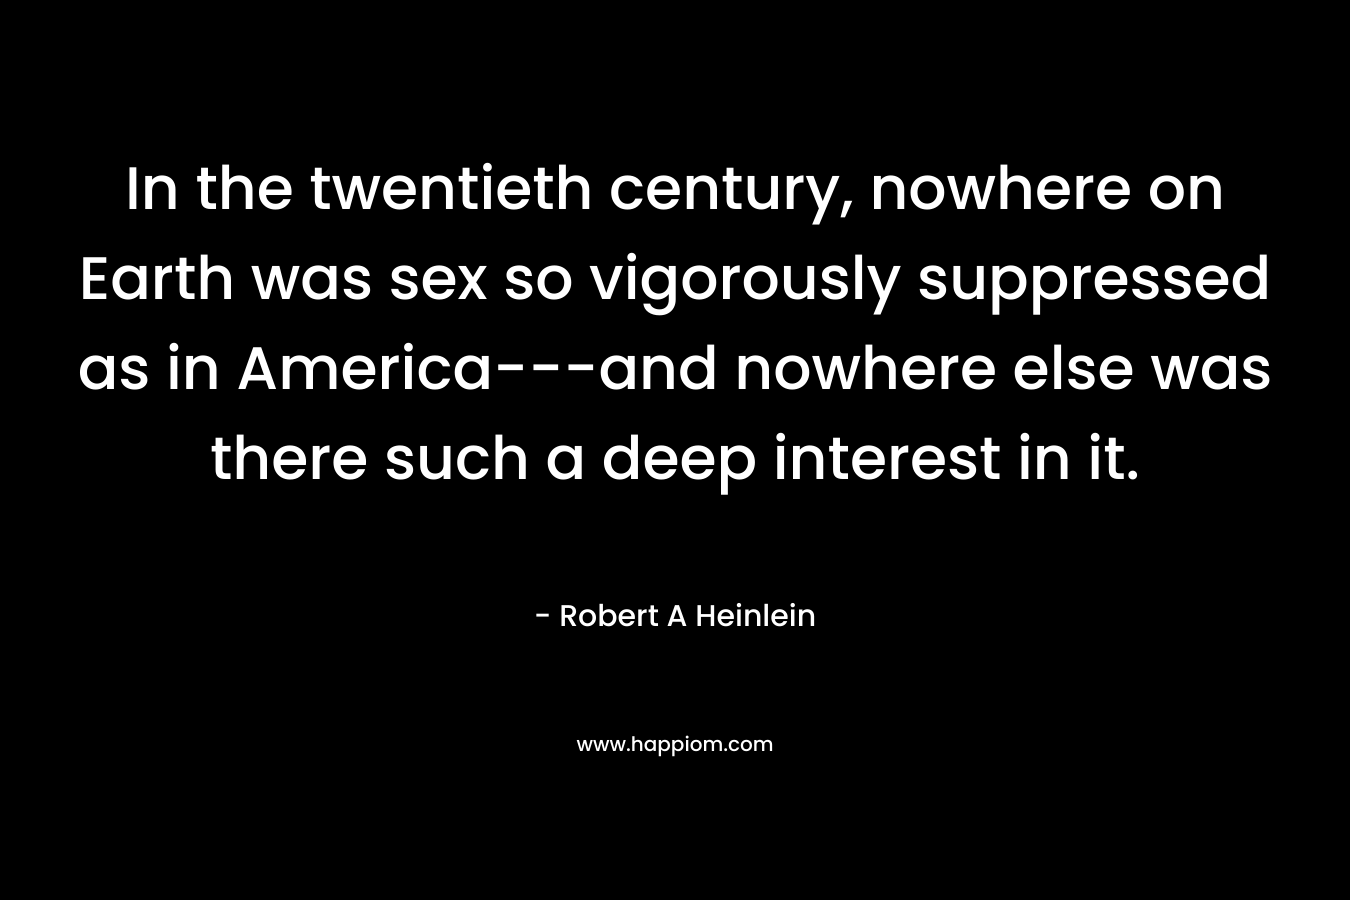 In the twentieth century, nowhere on Earth was sex so vigorously suppressed as in America—and nowhere else was there such a deep interest in it. – Robert A Heinlein